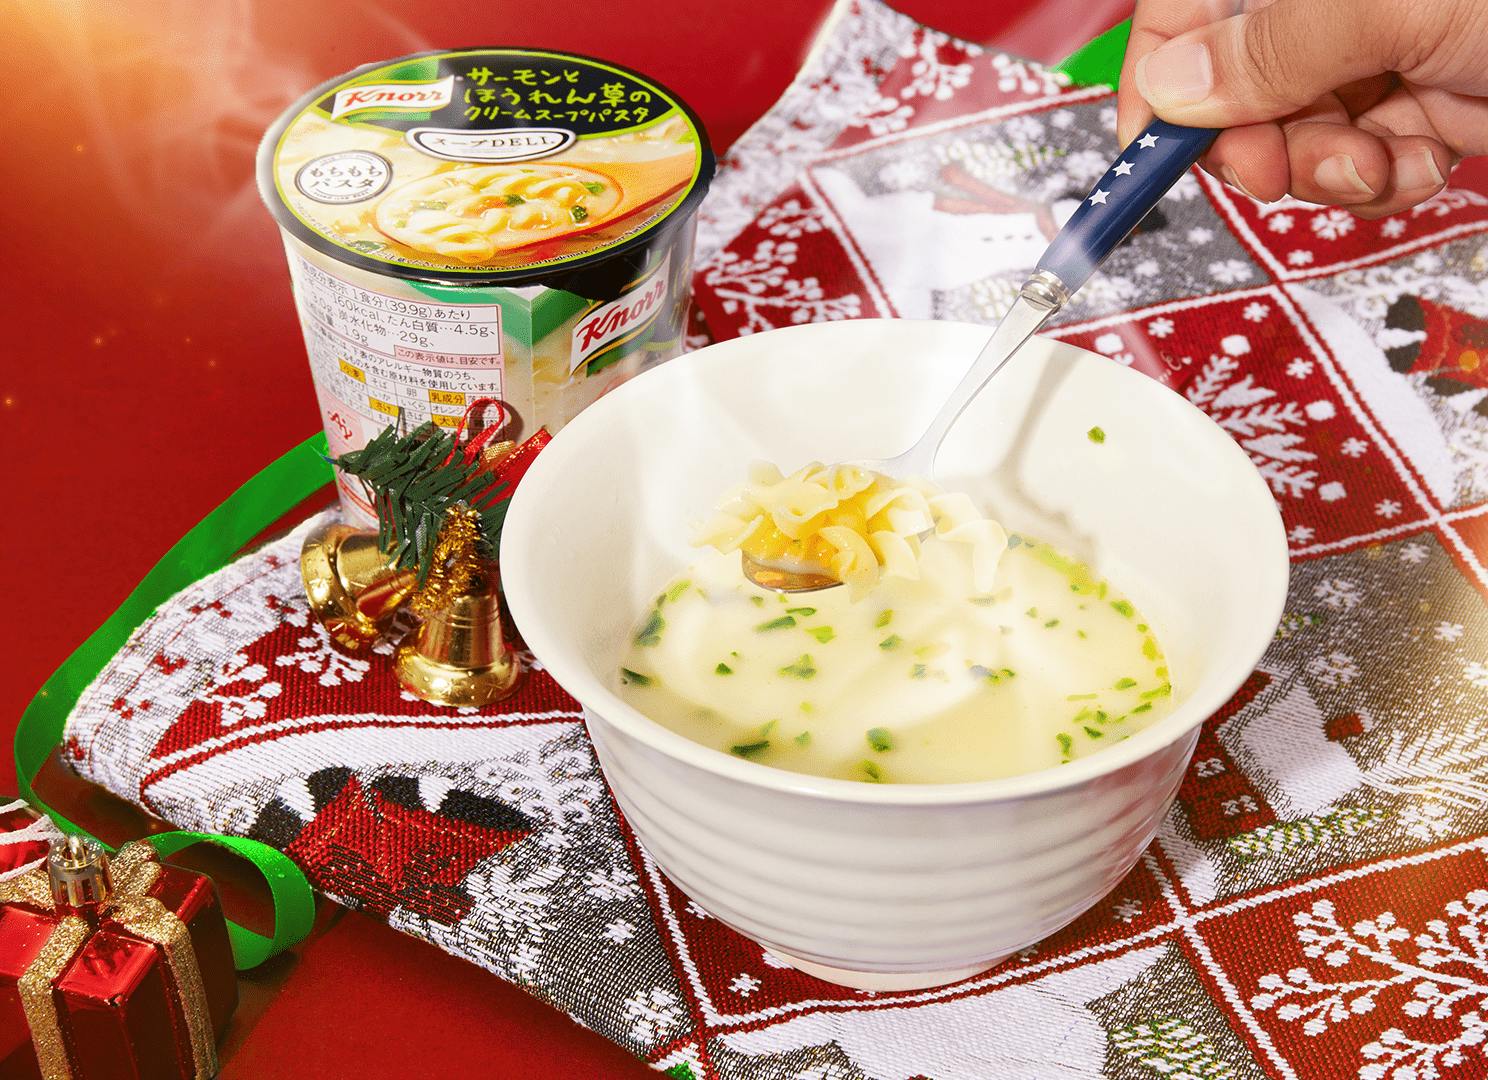 A man dips a spoon into creamy pasta on a Christmas placemat.